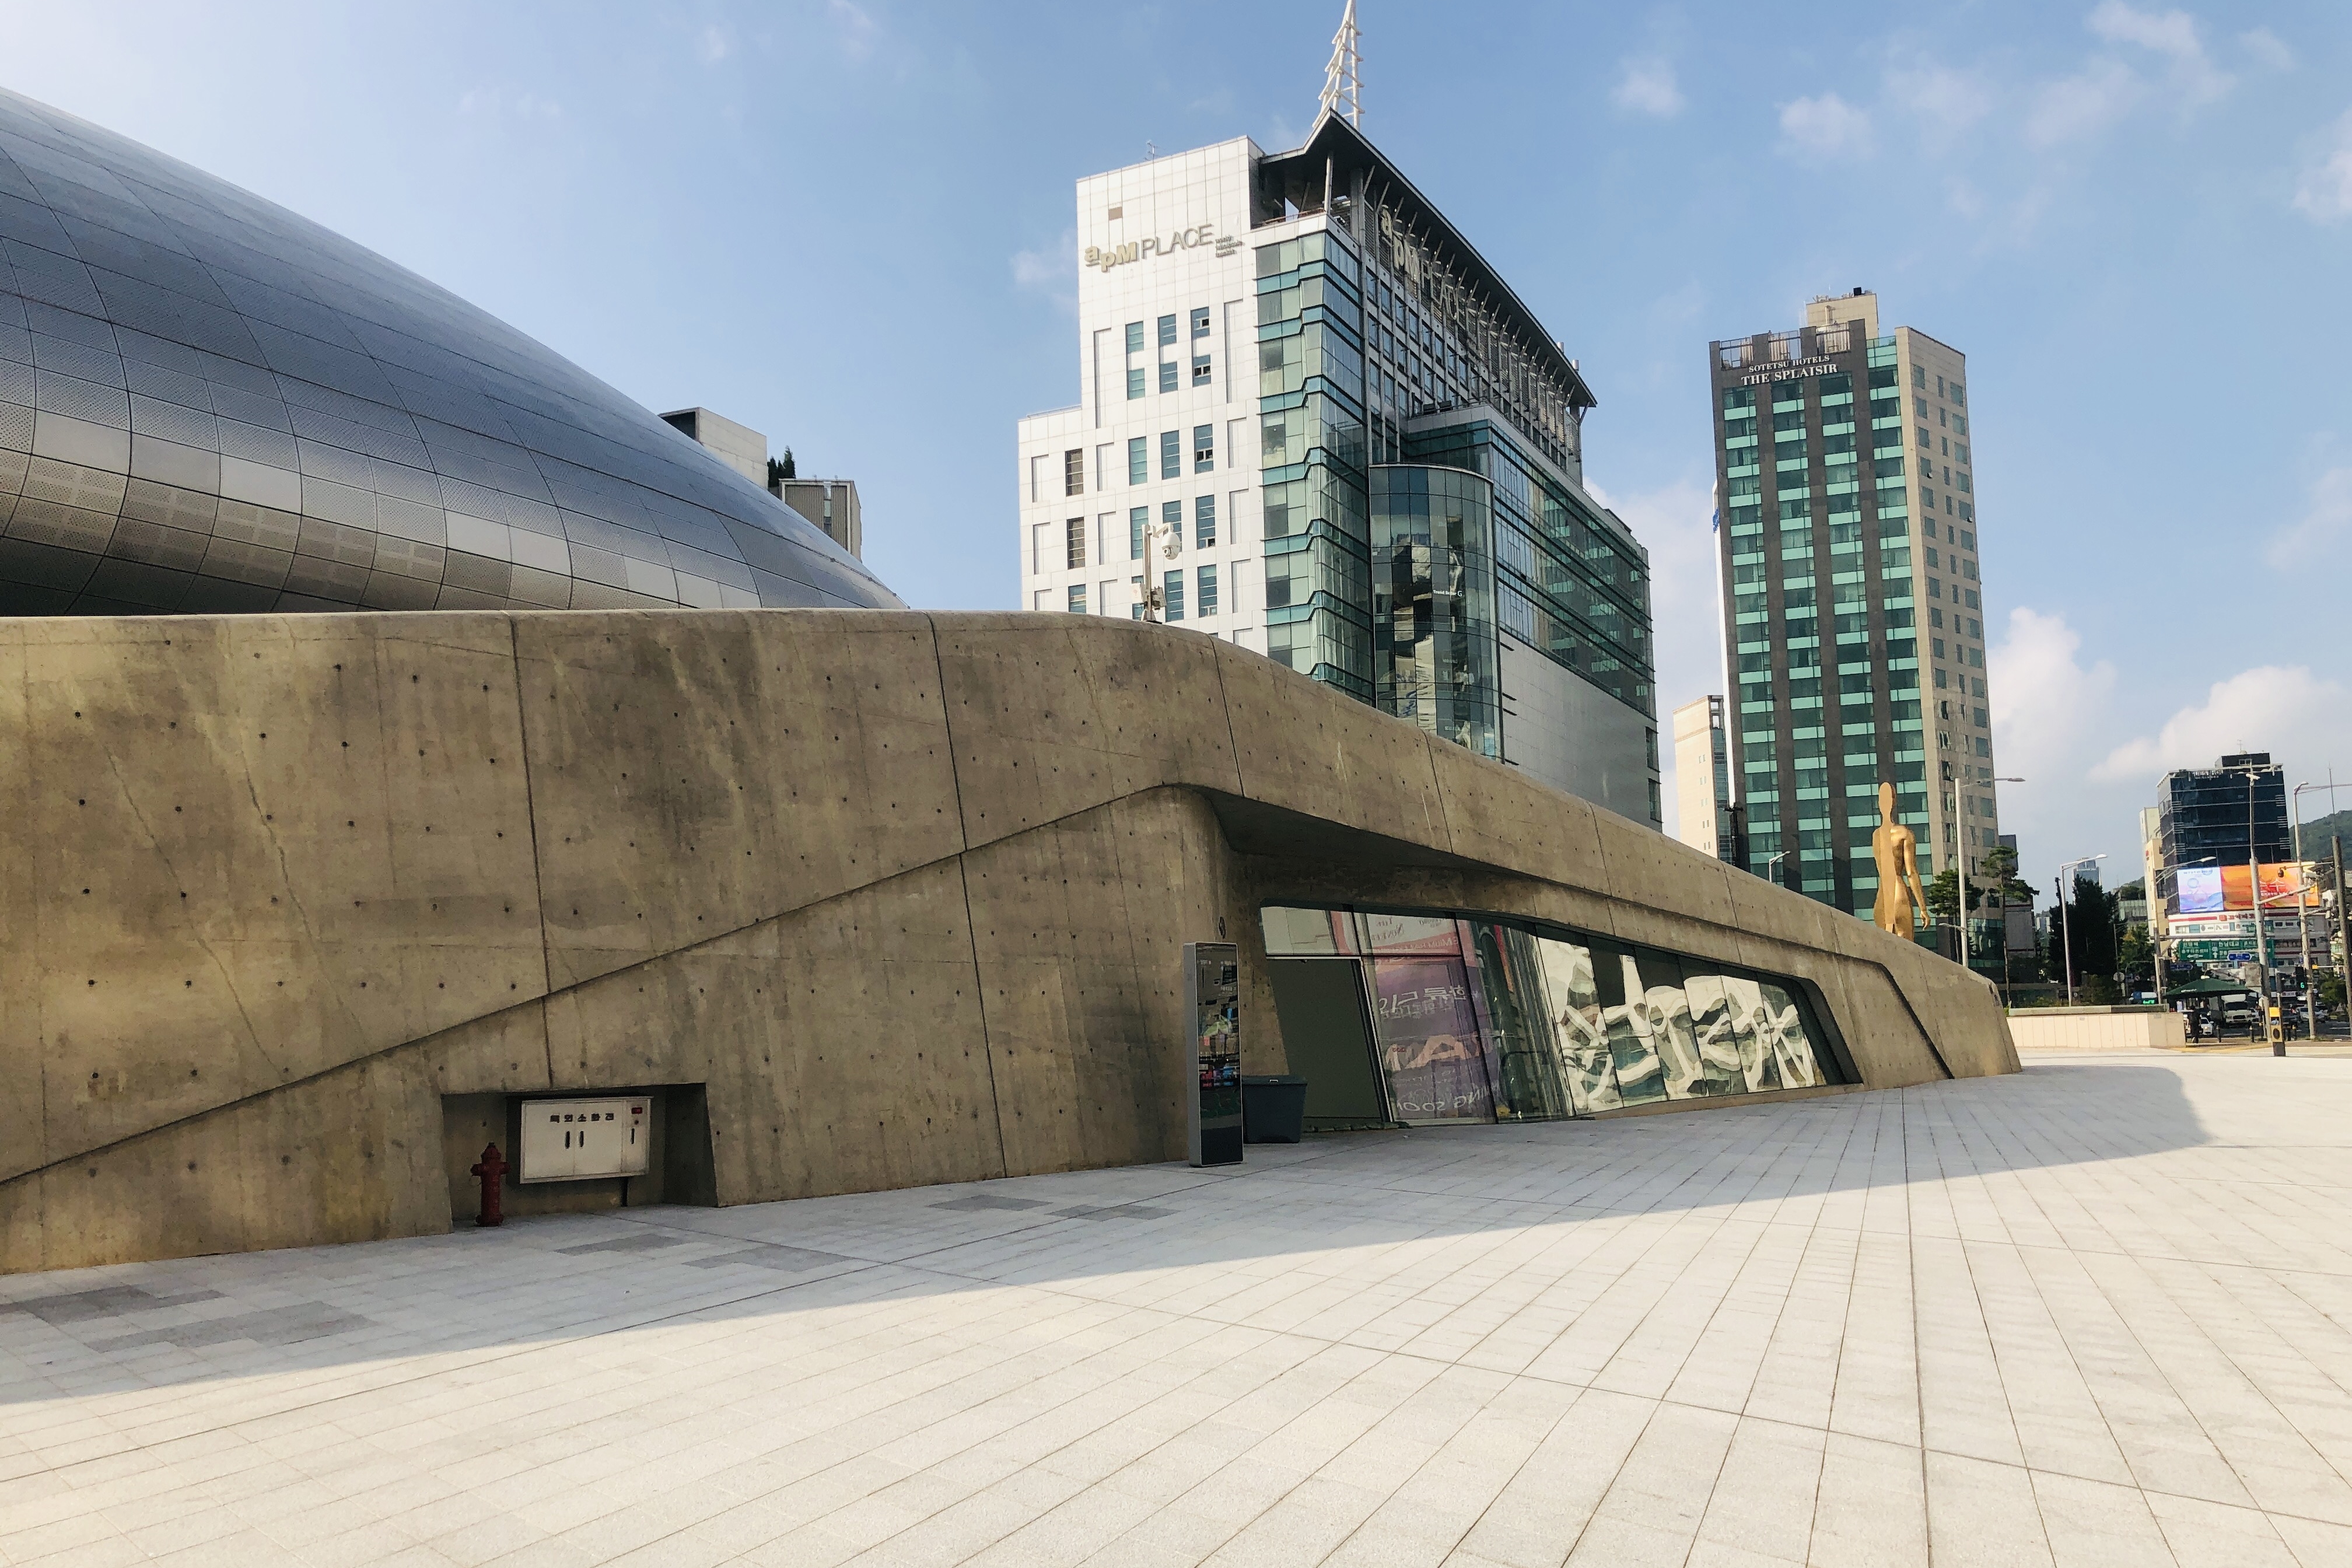 Dongdaemun Design Plaza (DDP)4 : The view of the entryway contrasting the unstructured building with the nearby square building